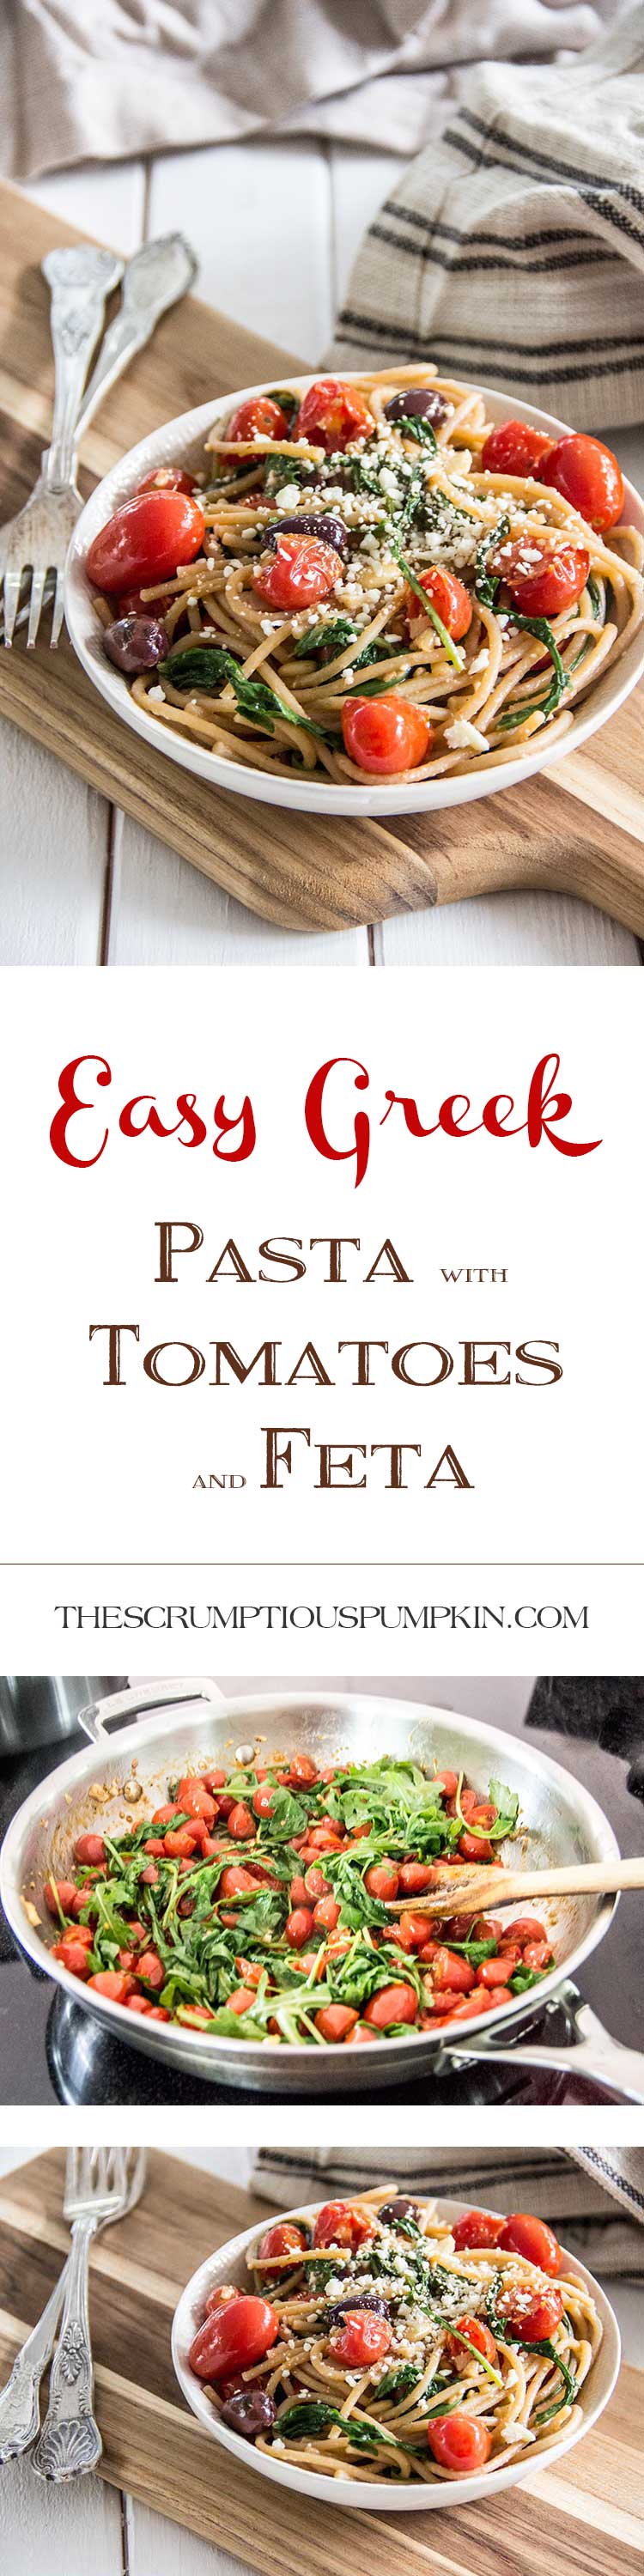 20-minute-easy-greek-pasta-with-tomatoes-and-feta